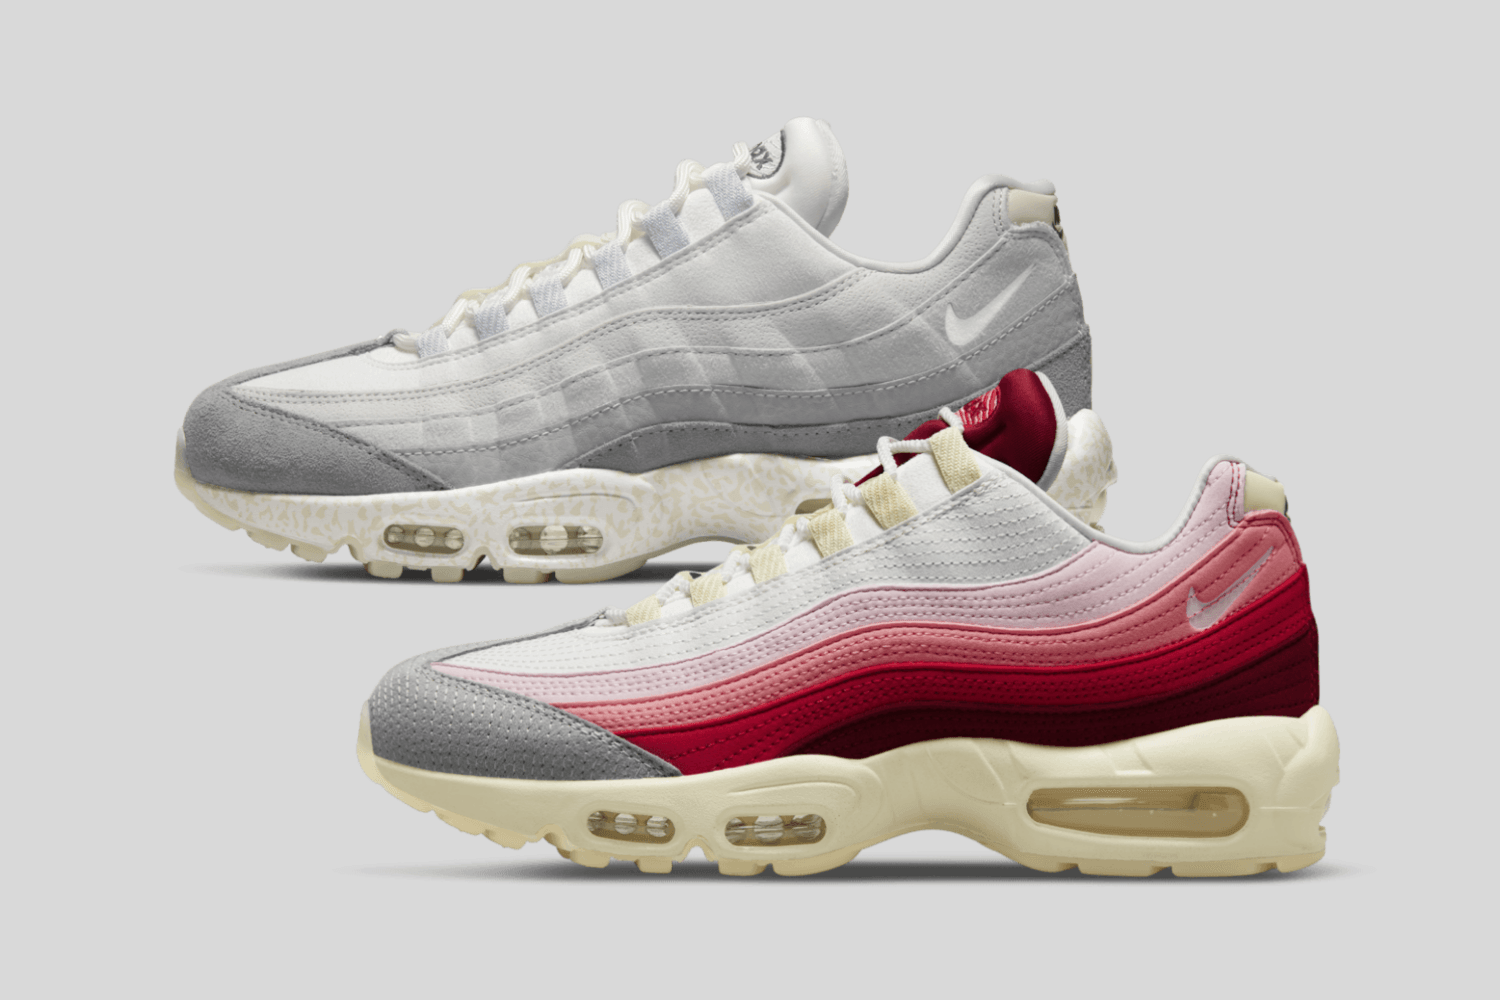 Nike Air Max 95 'Anatomy of Air' two-pack